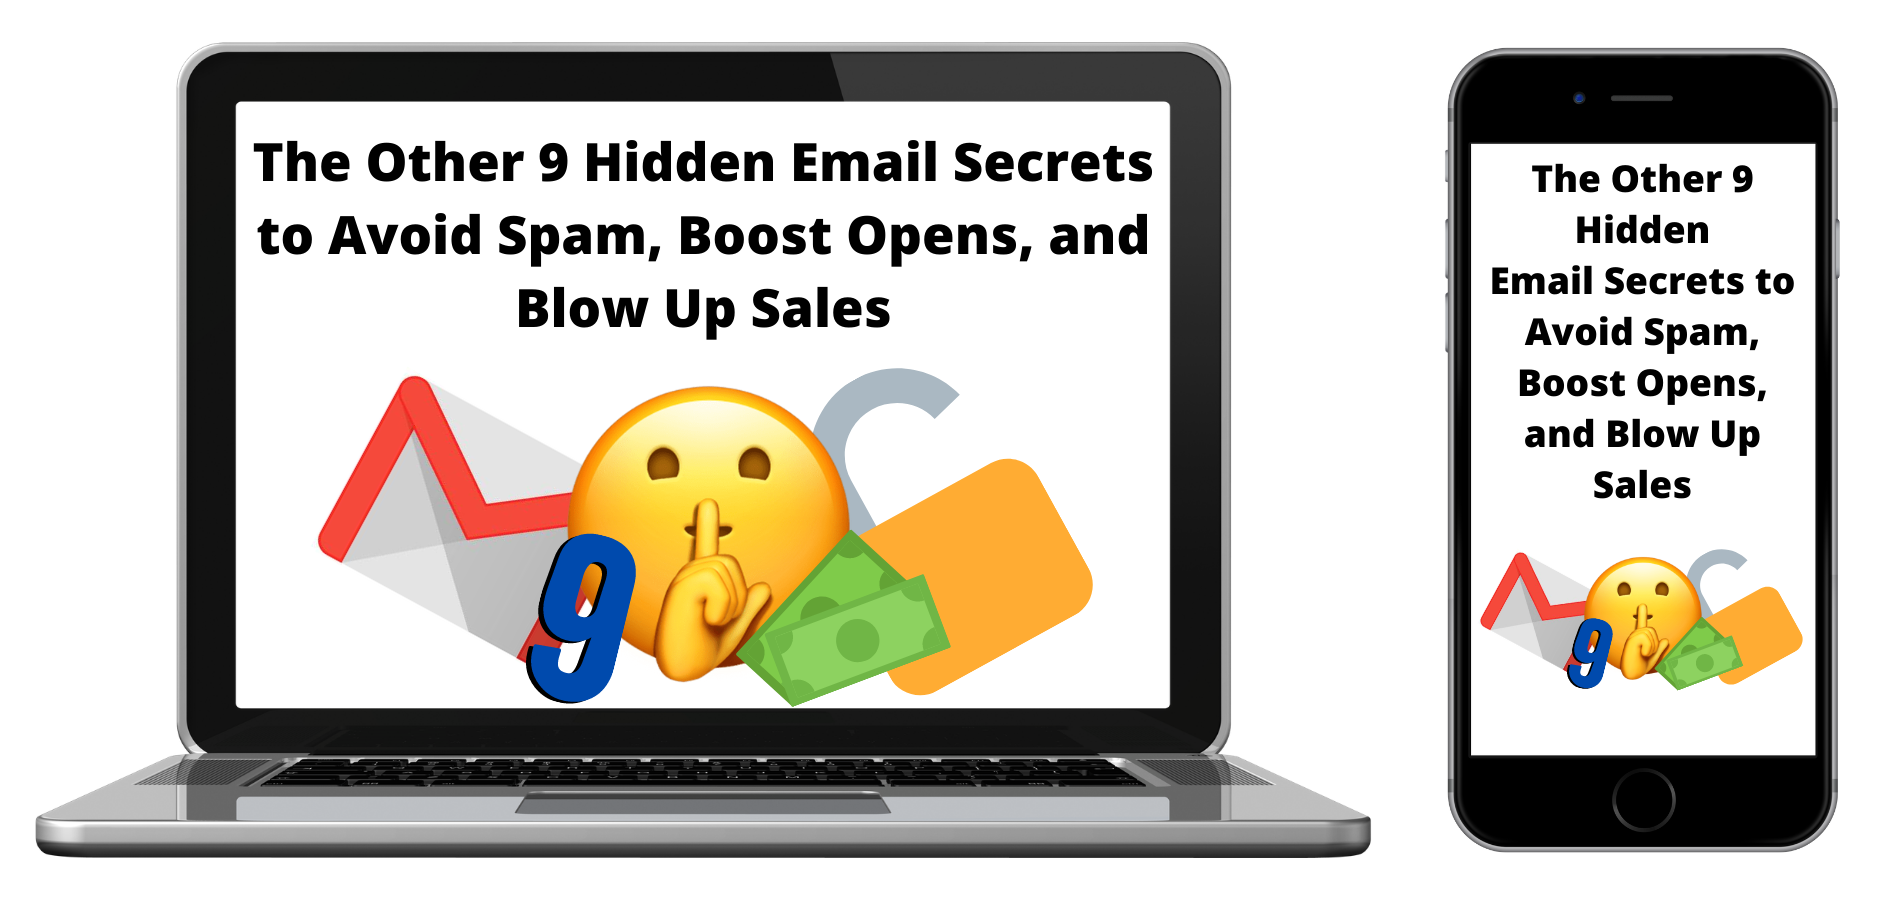 9 Other Hidden Email Secrets to Avoid Spam, Boost Opens, & Blow Up Sales